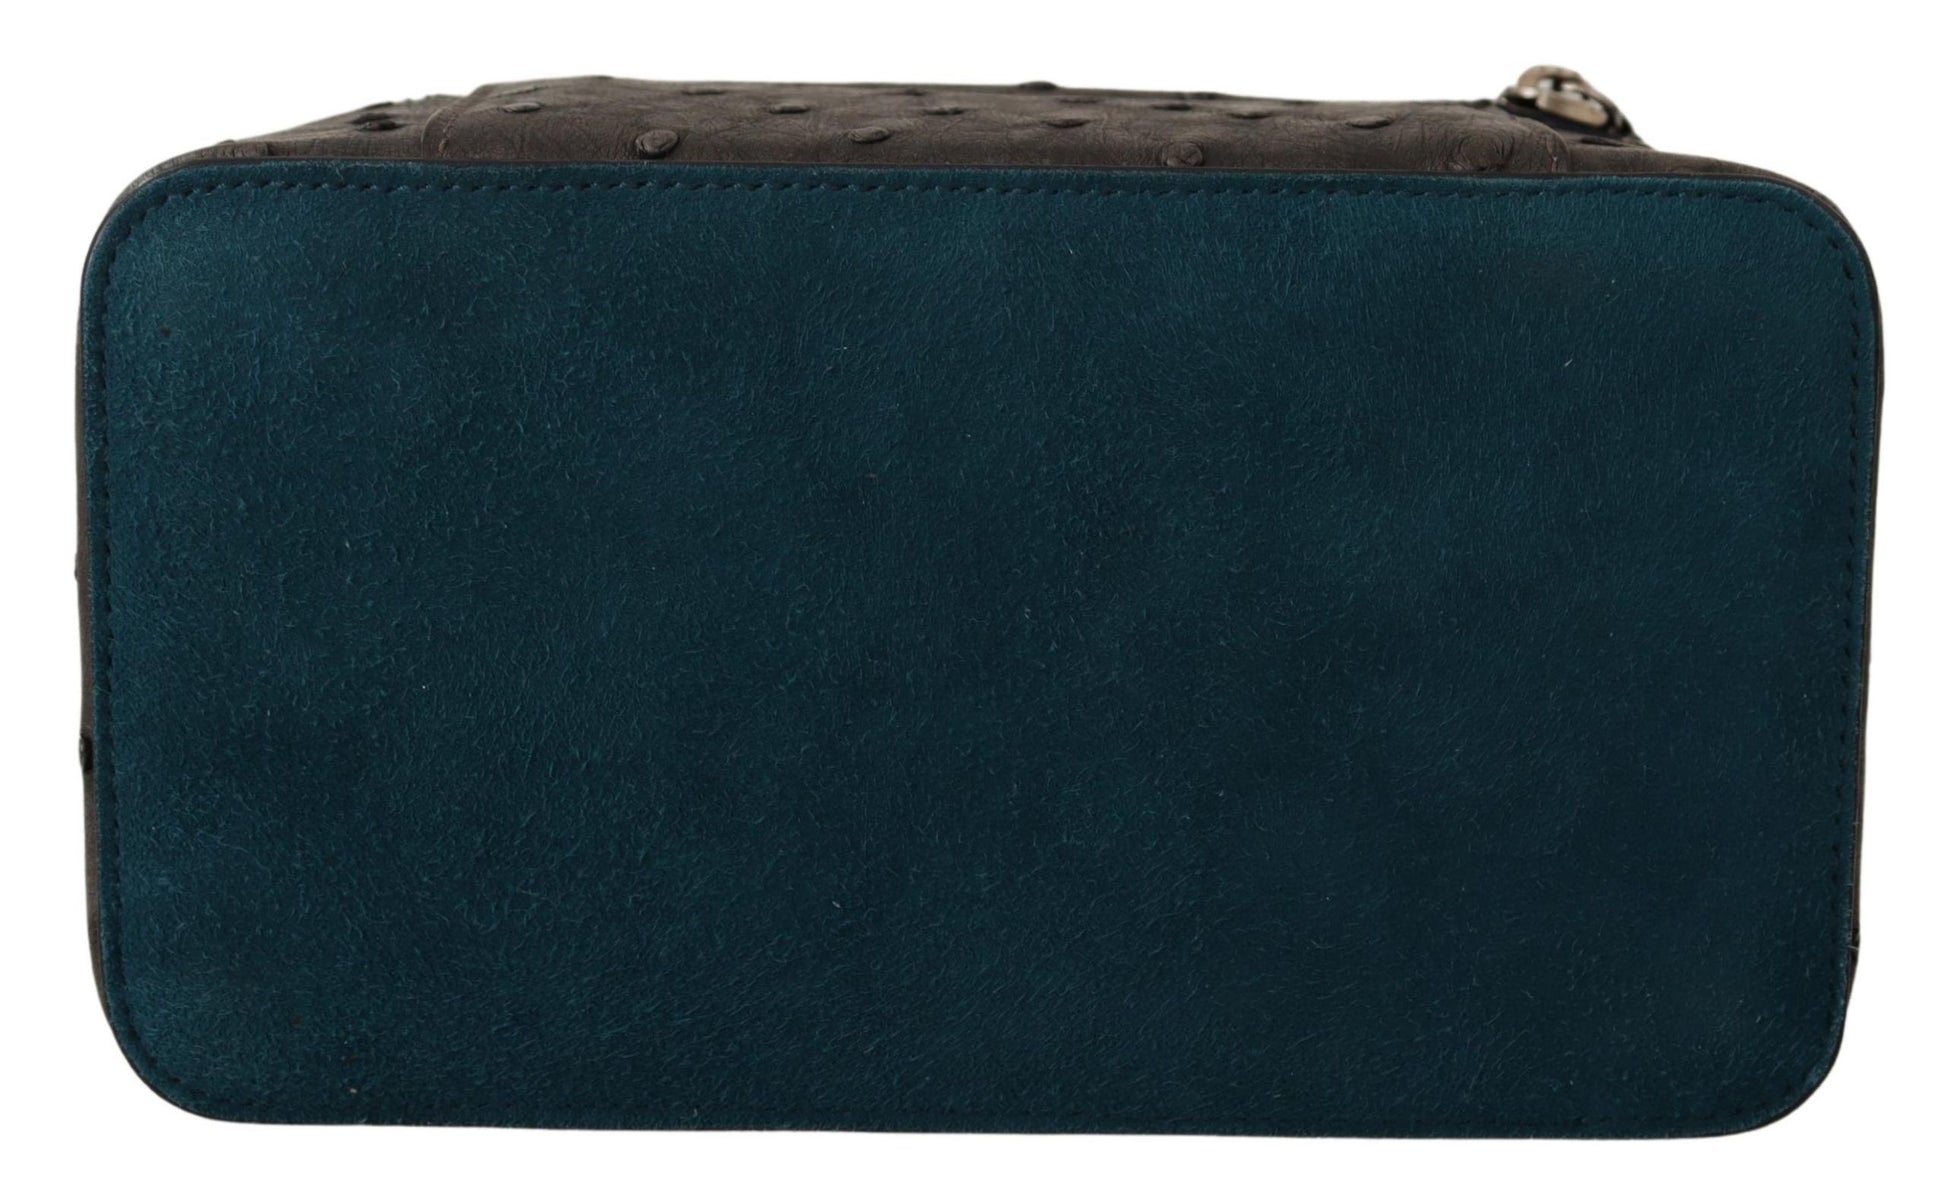 Gray Skin Leather Vanity Case Toiletry Shaving Bag - Designed by Dolce & Gabbana Available to Buy at a Discounted Price on Moon Behind The Hill Online Designer Discount Store